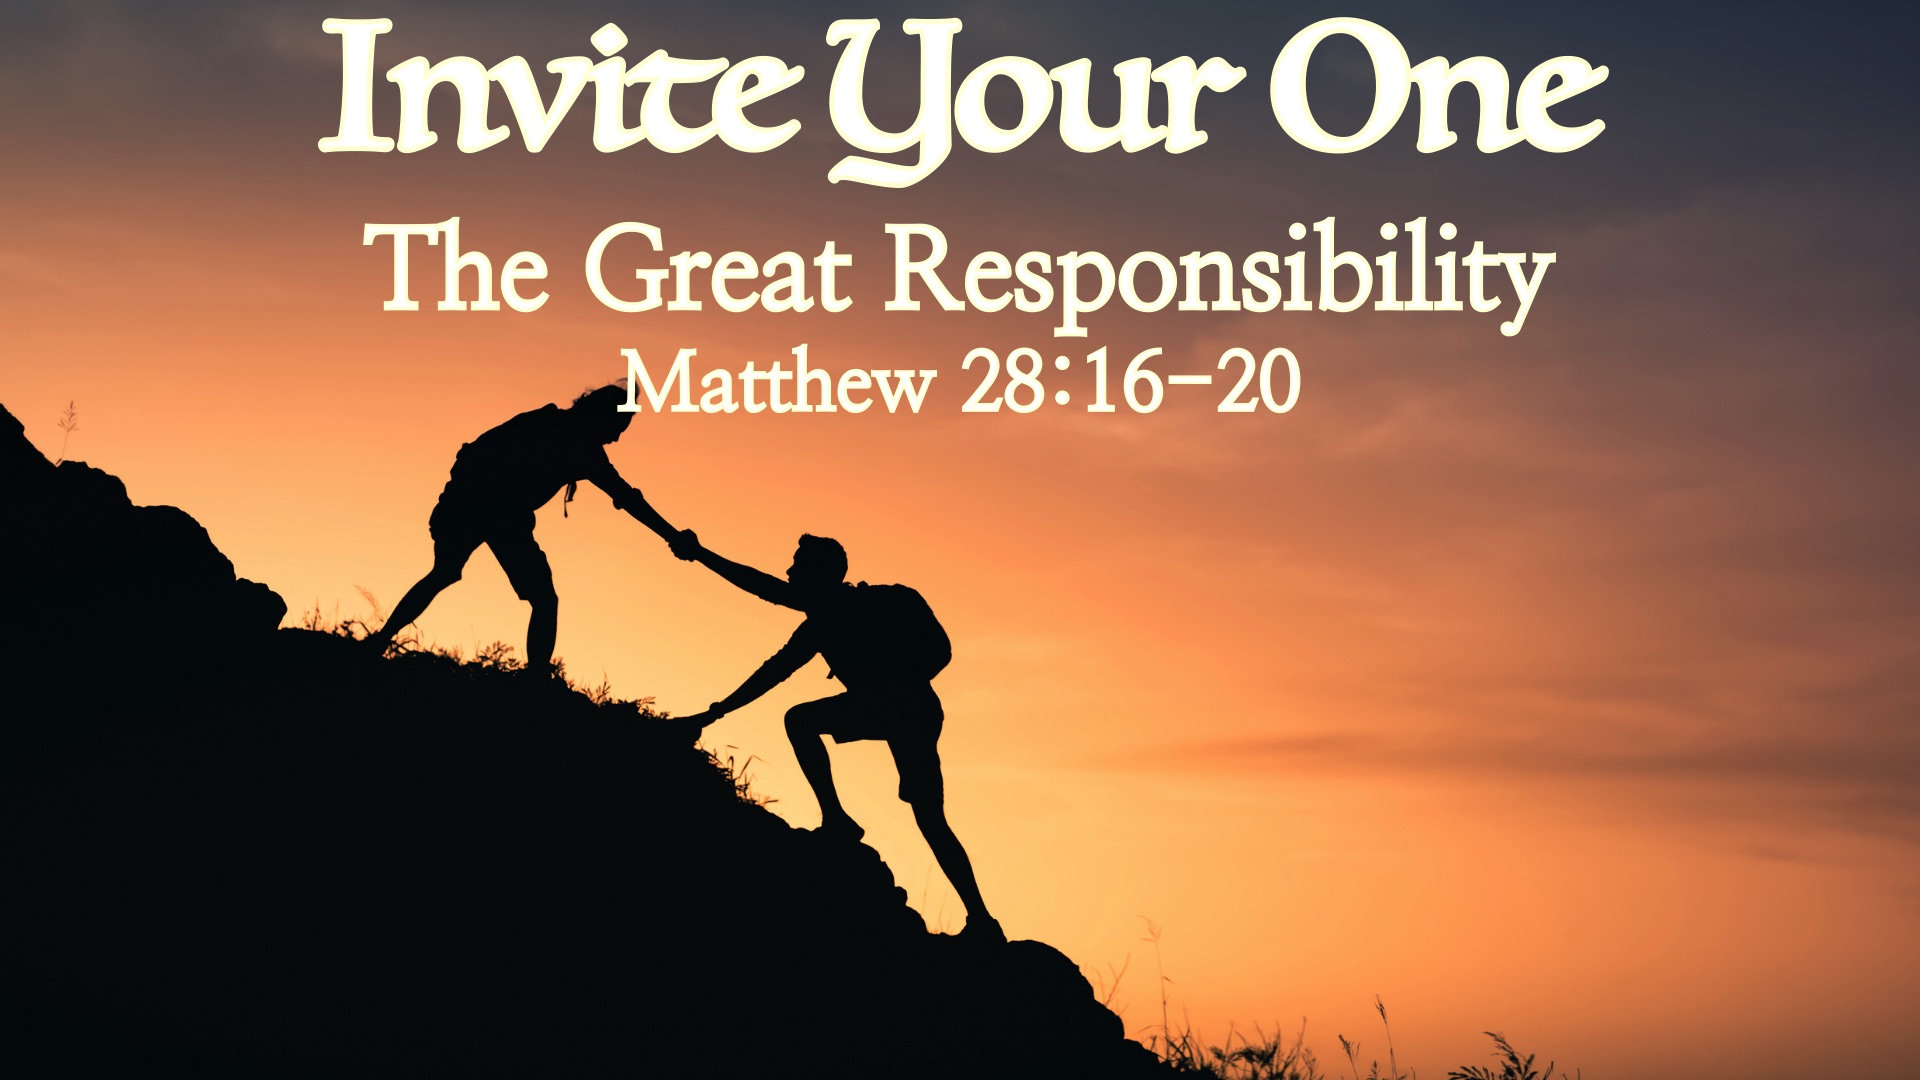 “Invite Your One: The Great Responsibility”